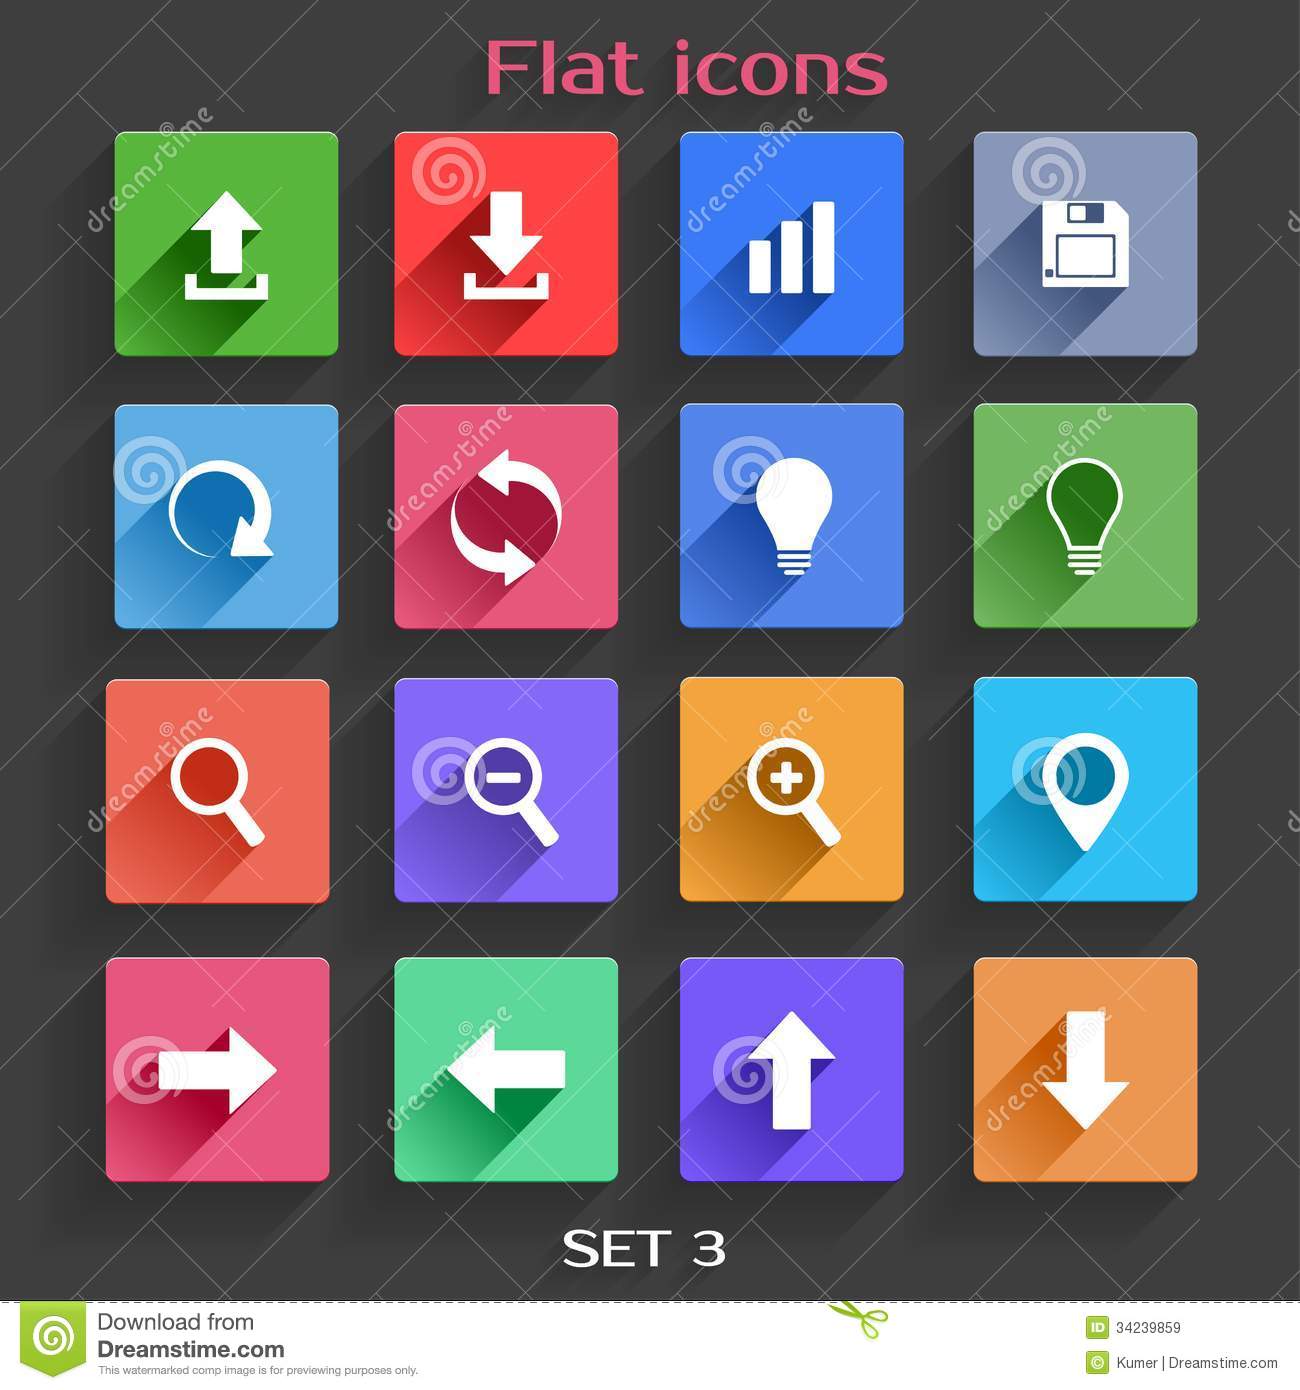 Free Navigation Icons for Web Applications